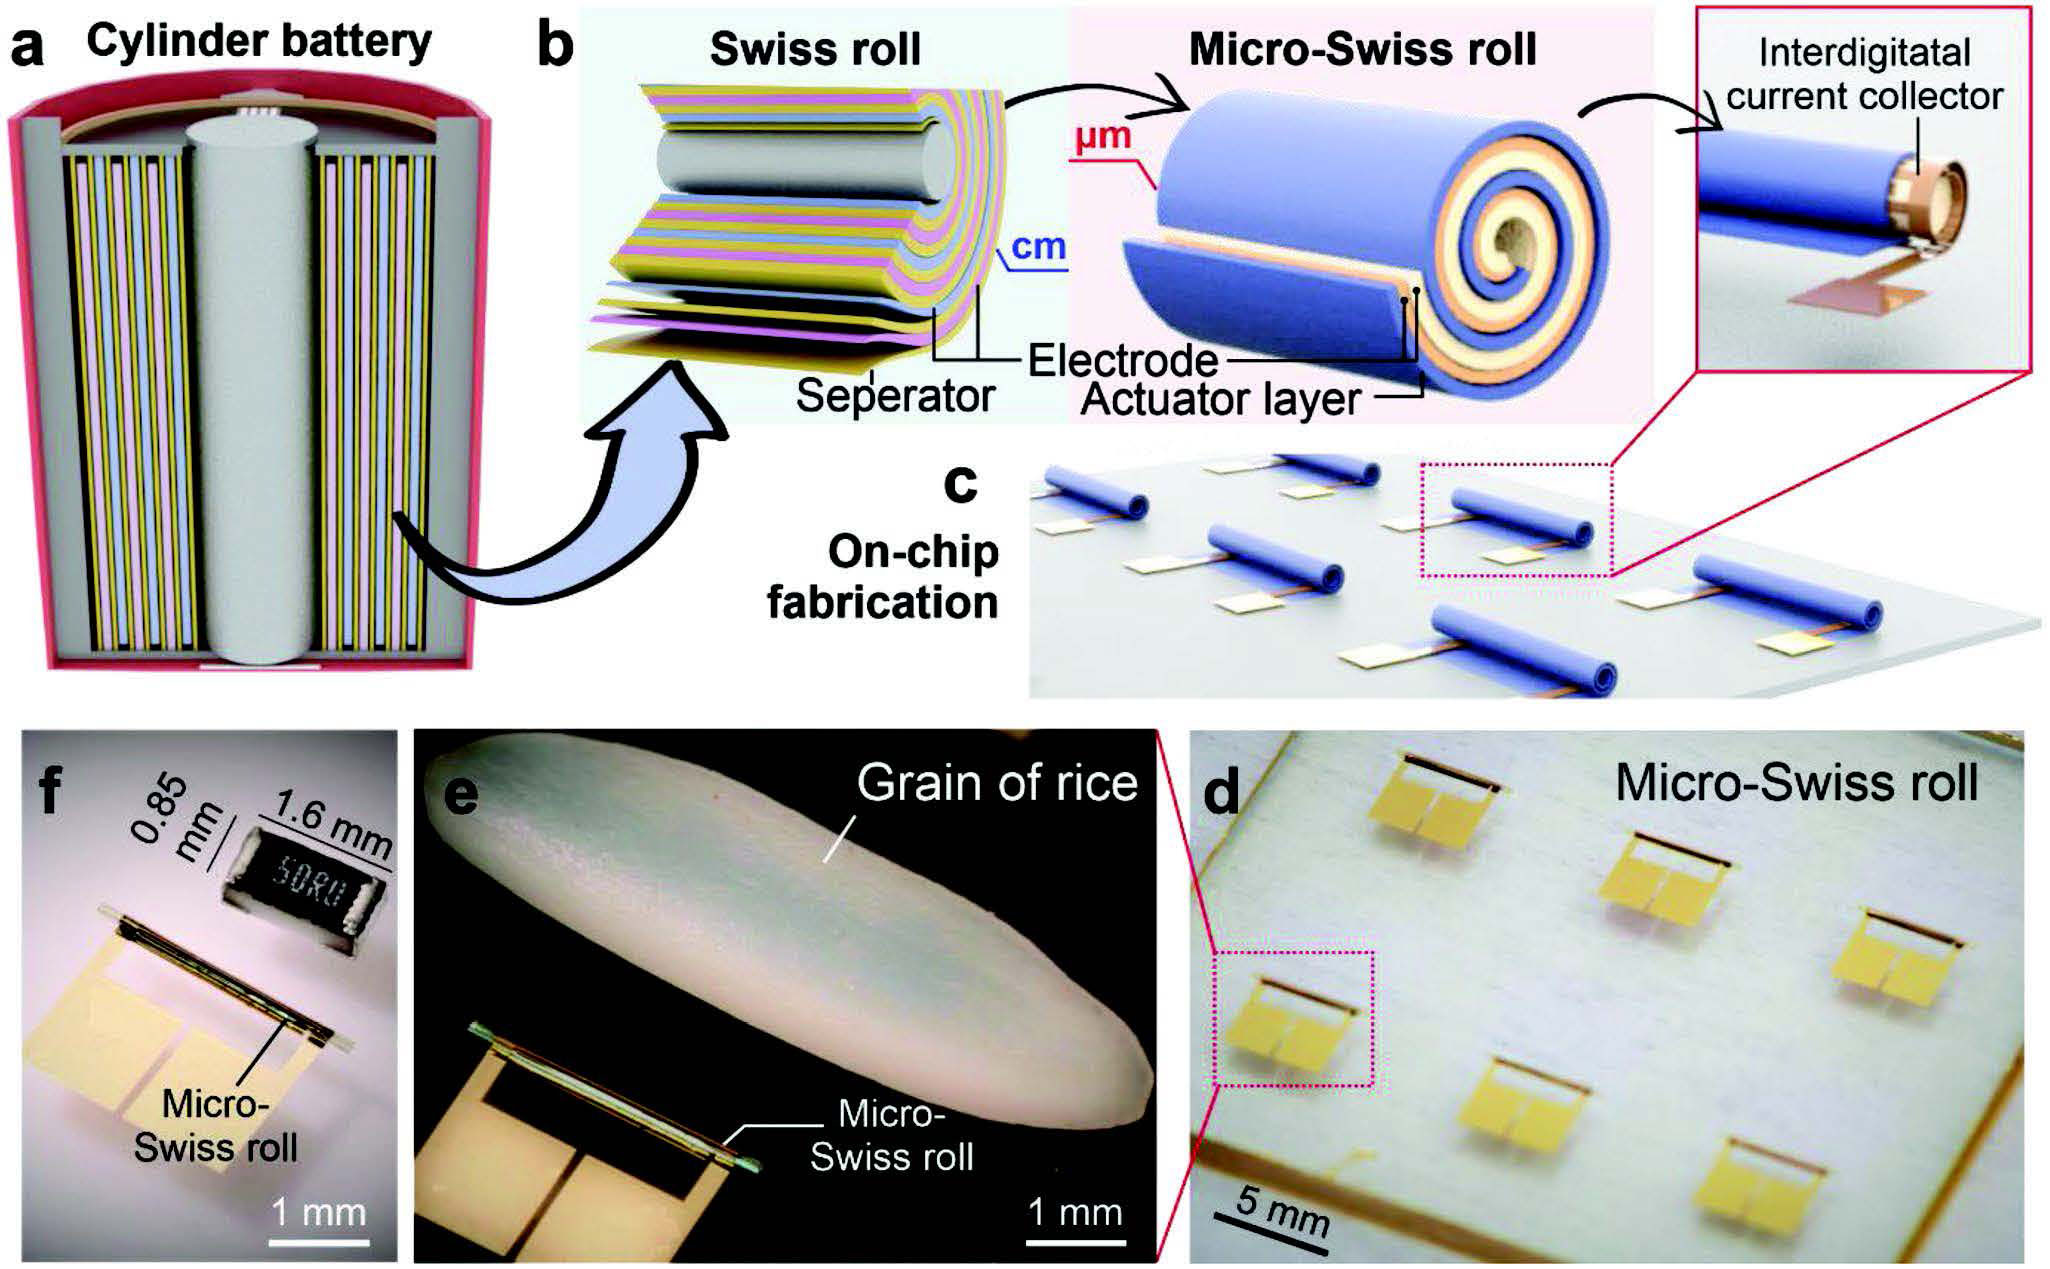 Swiss rolls in cylinder batteries and concept/realization of a micro-Swiss roll